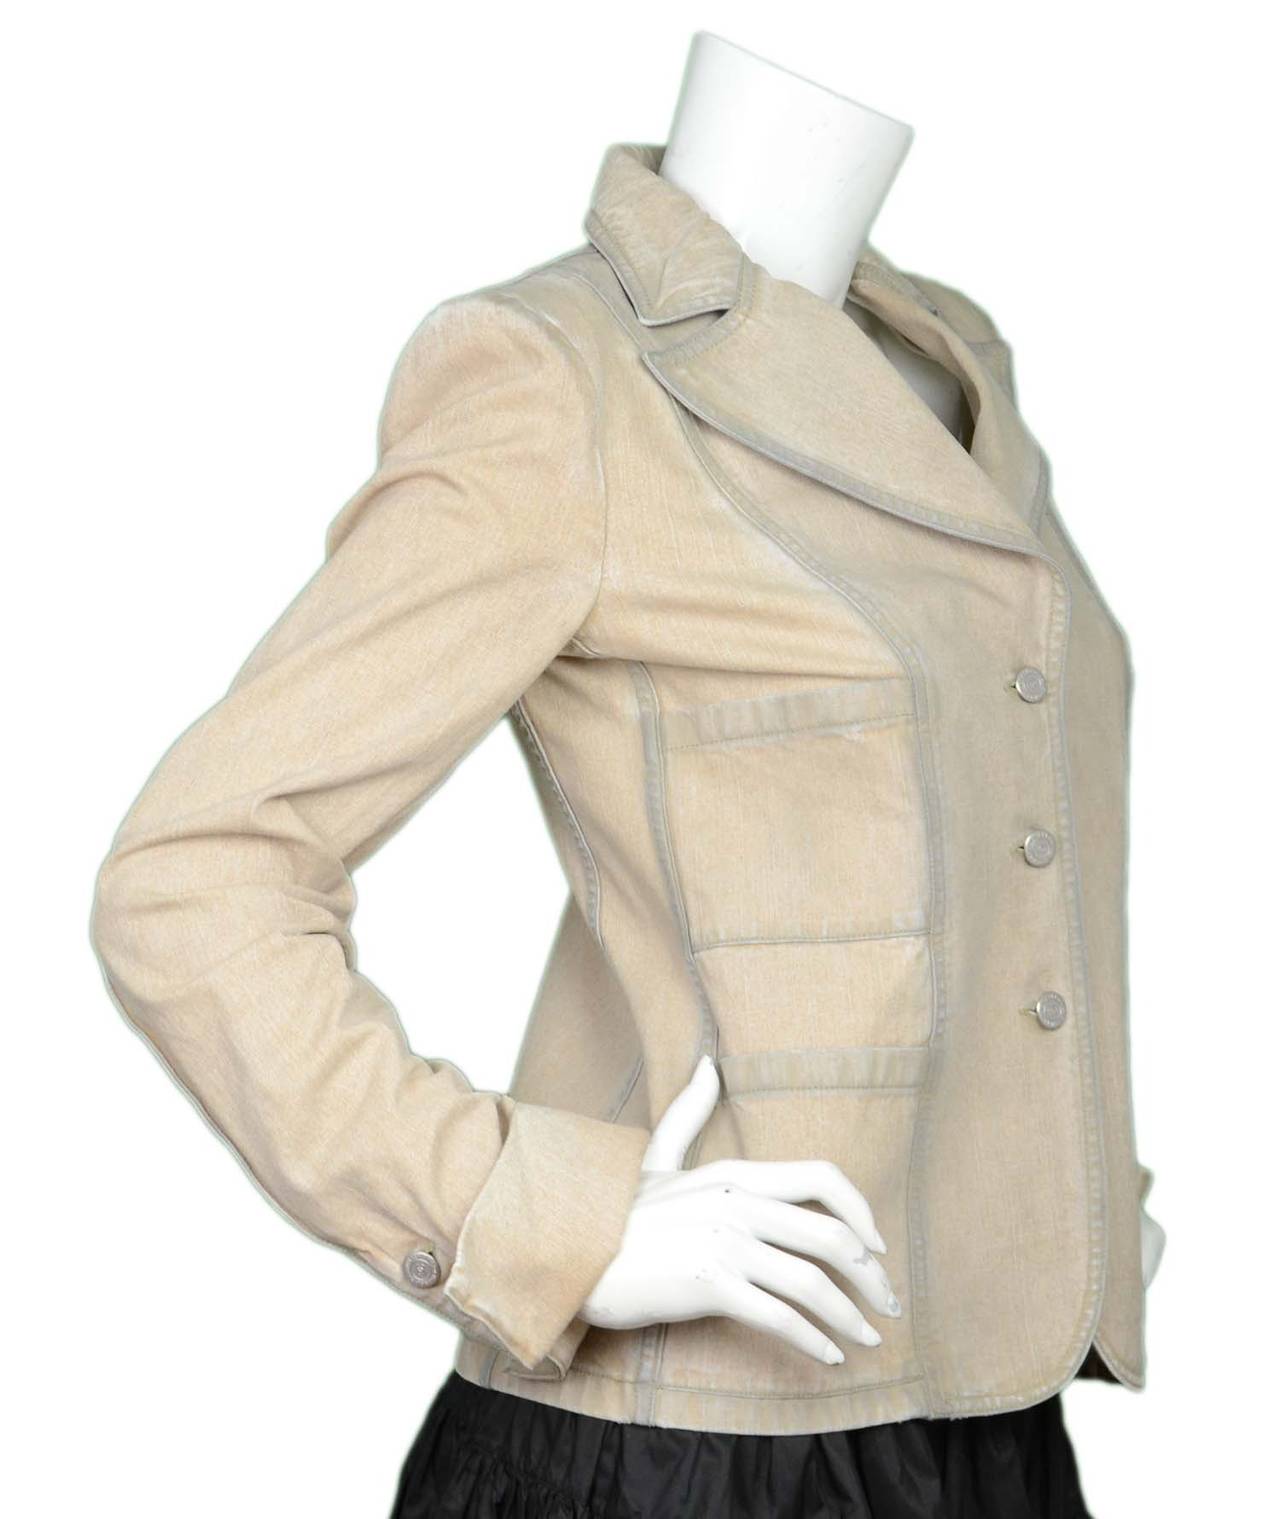 Chanel '02 Beige Denim Blazer w/White Buttons sz 38

    Made in: Italy
    Year of Production: 2002
    Color: Beige
    Composition: 90% denim, 10% spandex
    Lining: None
    Closure/opening: Single breasted closure
    Exterior Pockets: